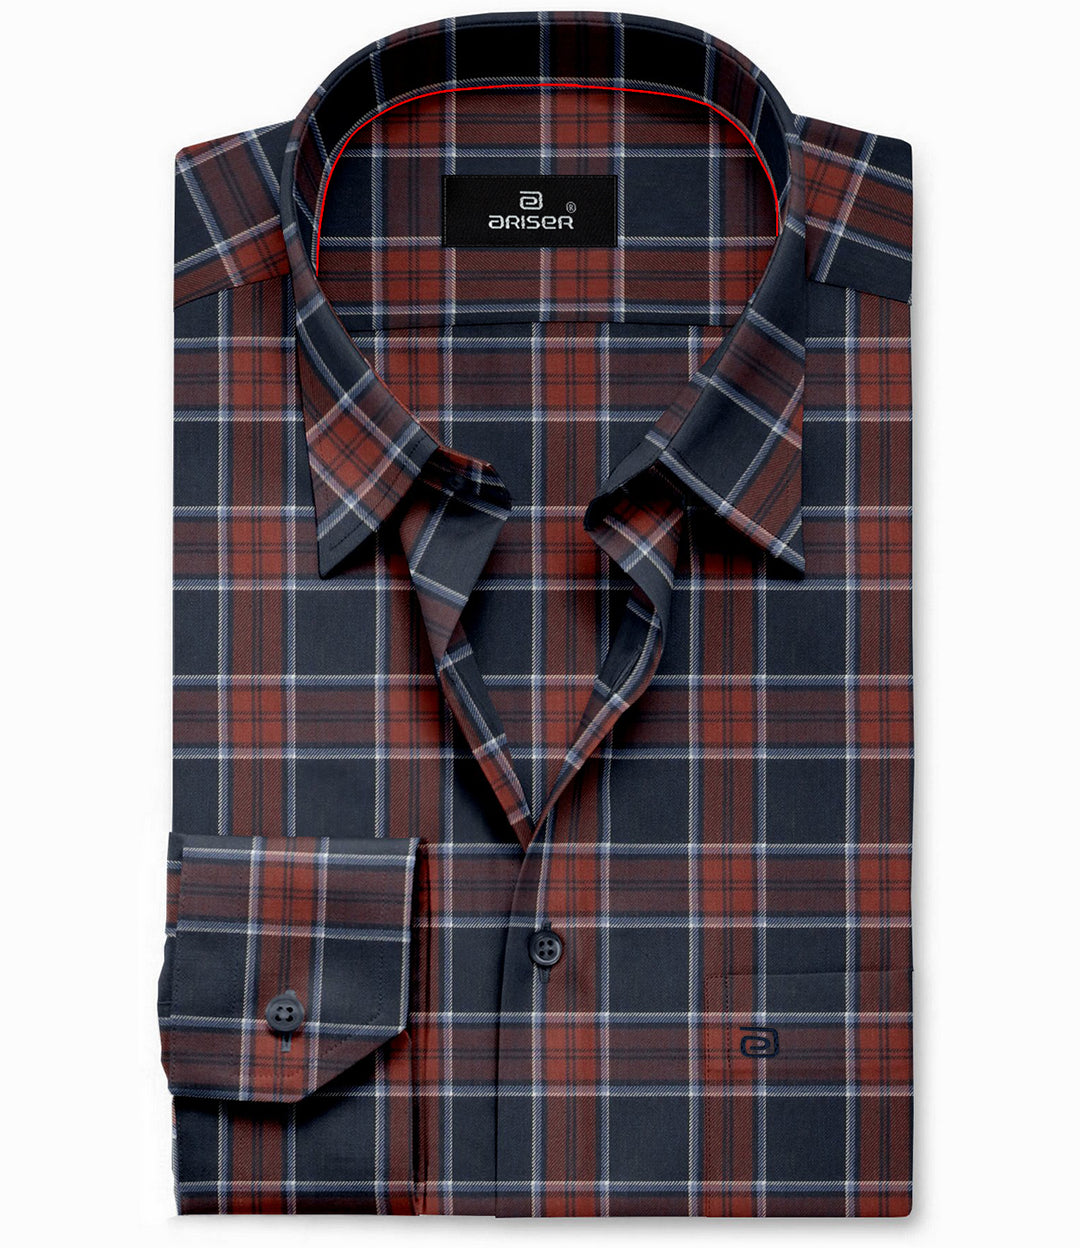 brown and blue cotton check shirt